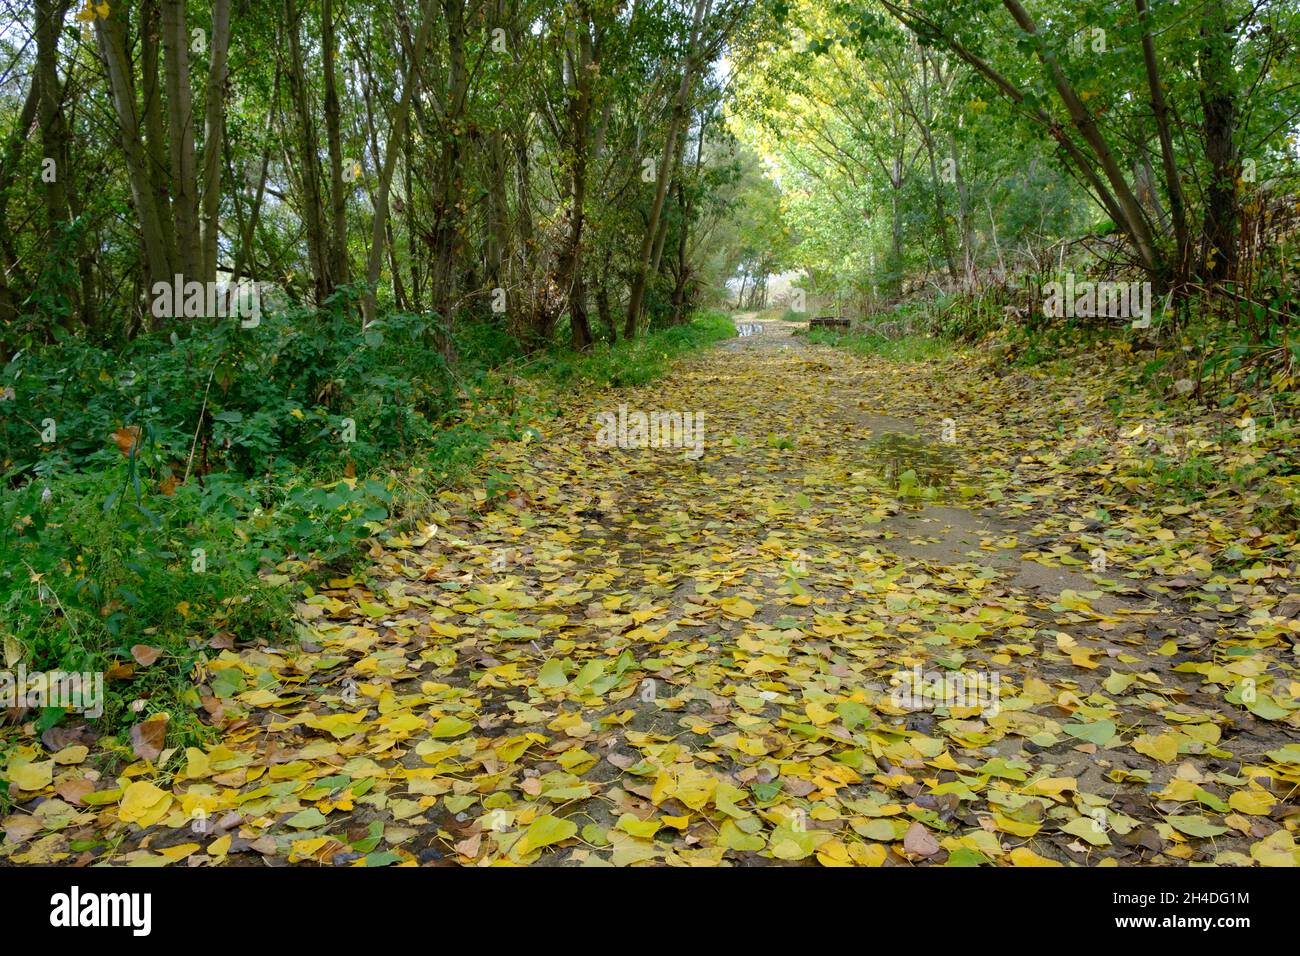 a path in the middle of the forest with leaves on the ground in autumn Stock Photo